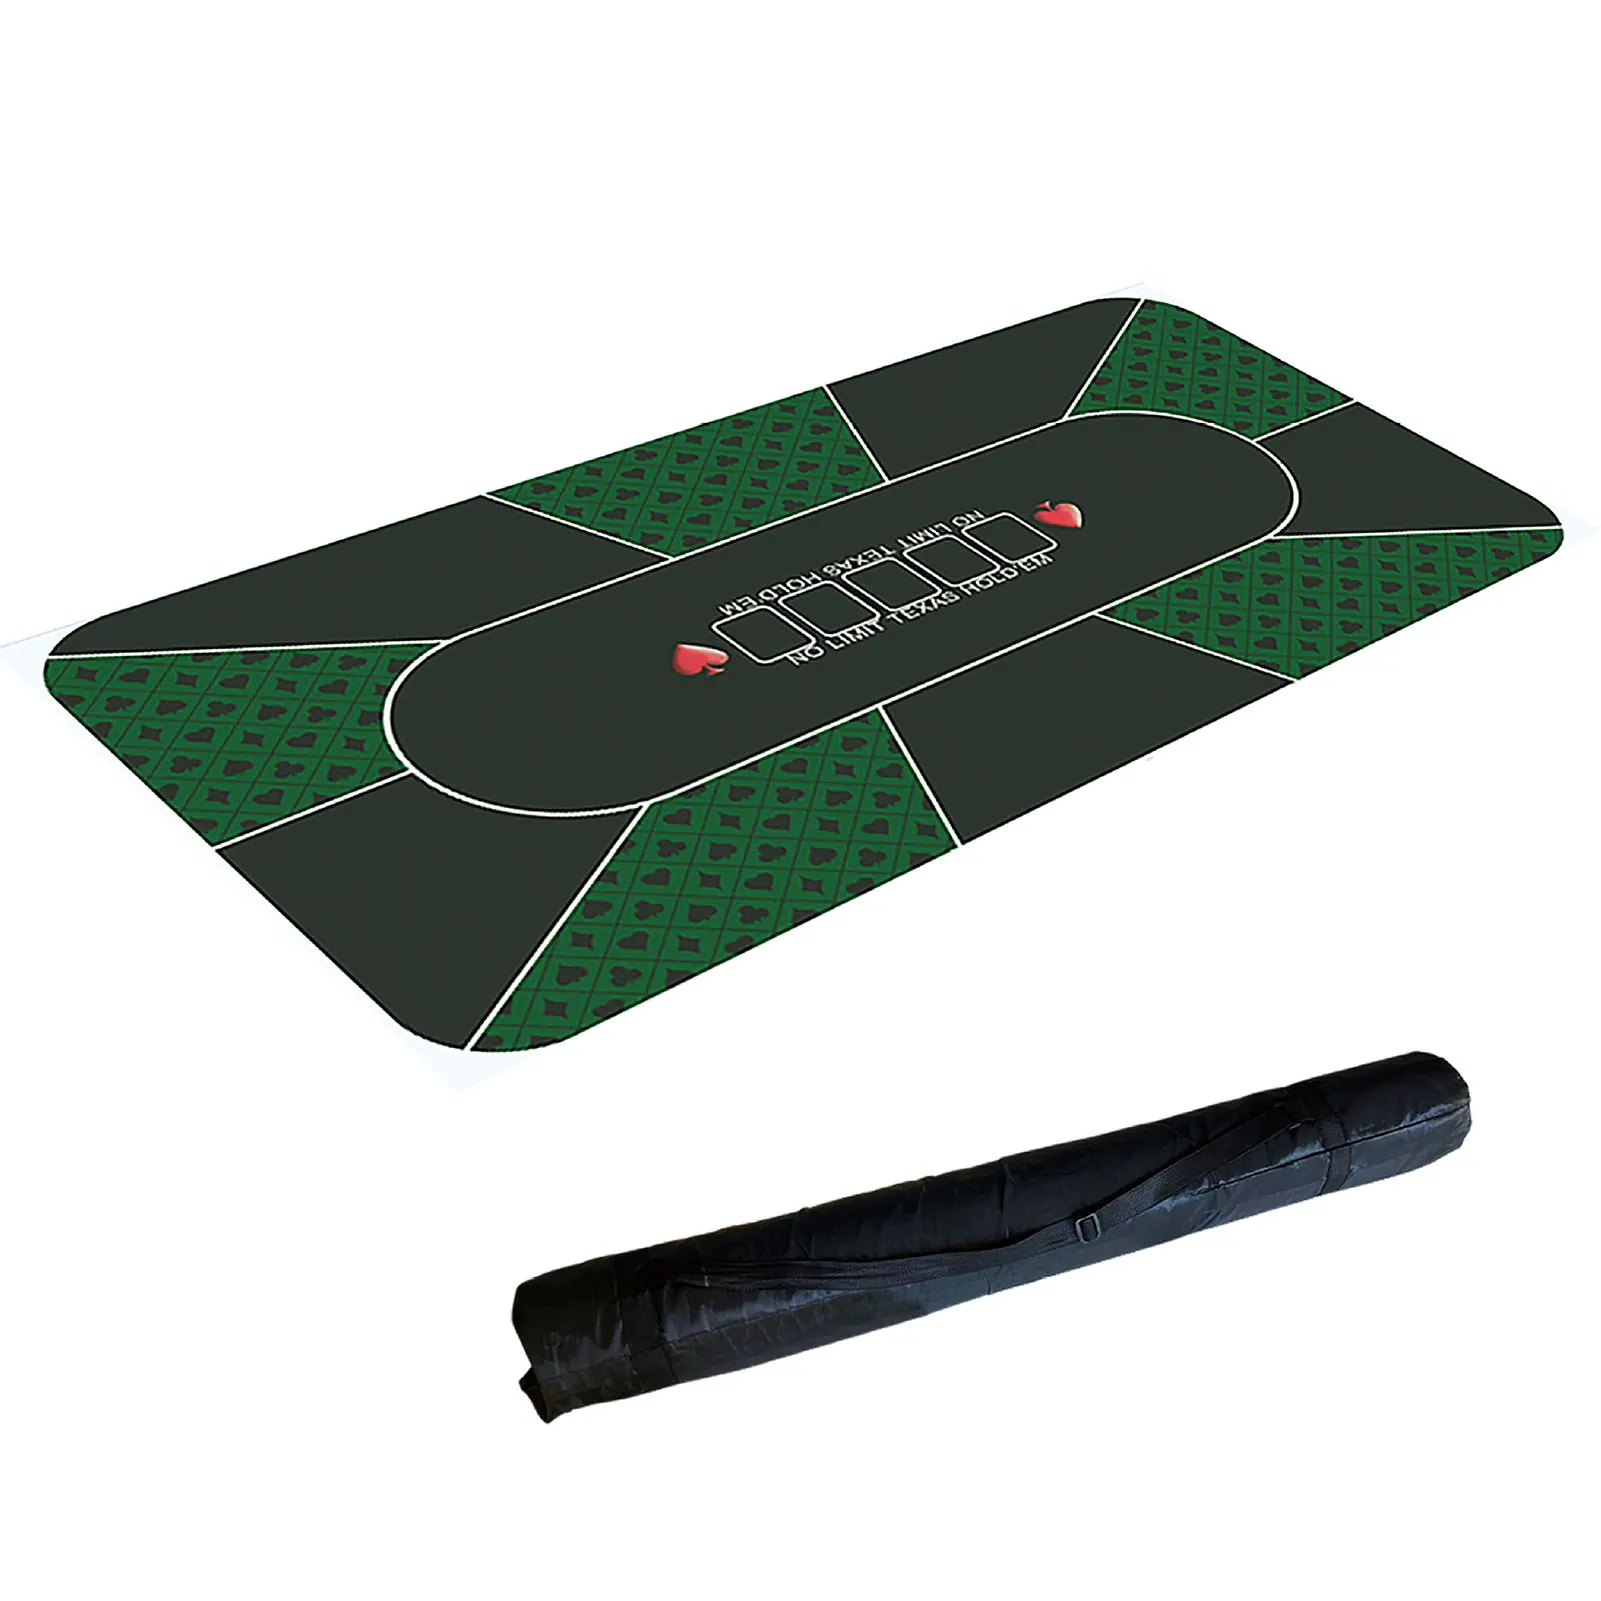 

Deluxe Suede Rubber Texas Hold'em Pokers Tablecloth With Flower Pattern Casino Poker Set Board Game Mat Poker Accessory